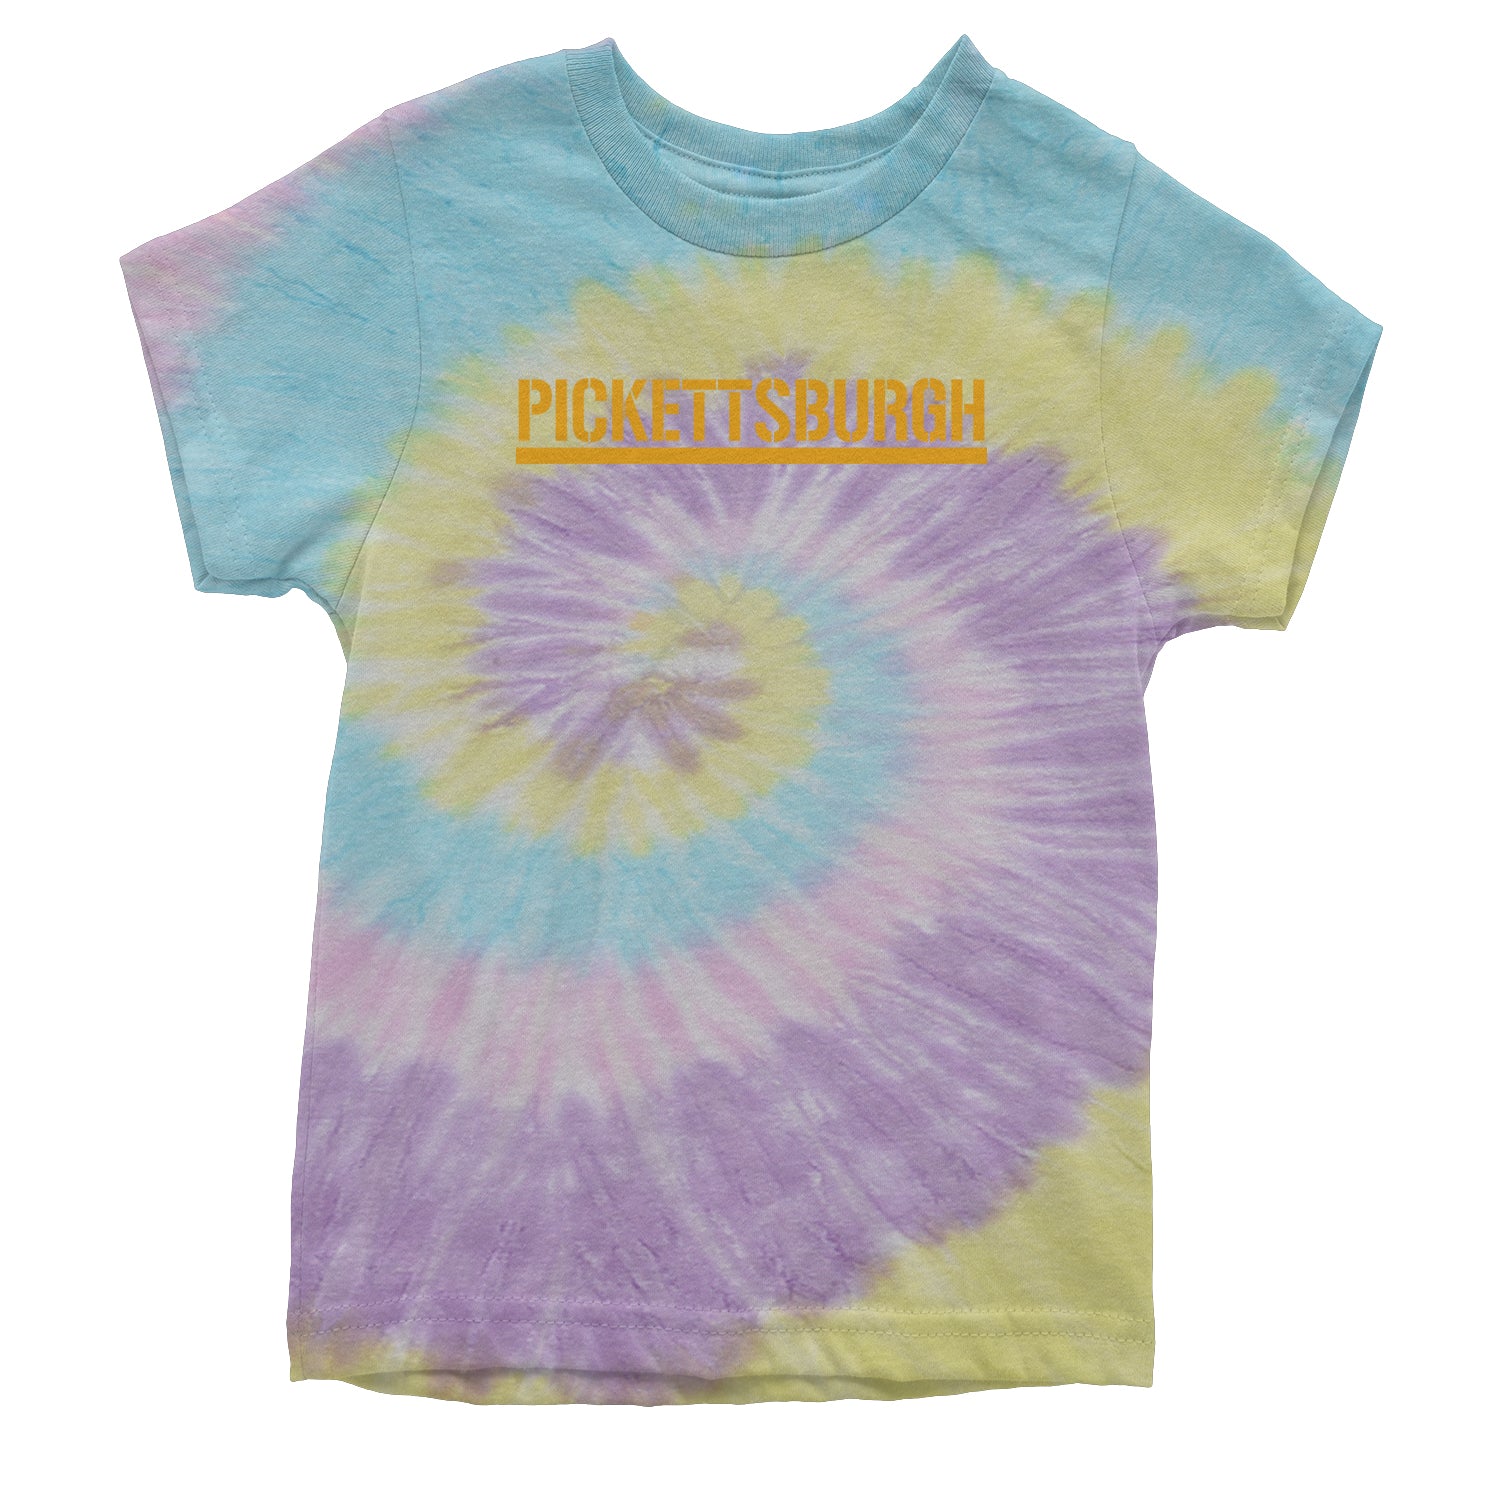 Pickettsburgh Pittsburgh Football Youth T-shirt apparel, city, clothing, curtain, football, iron, jersey, nation, pennsylvania, steel, steeler by Expression Tees